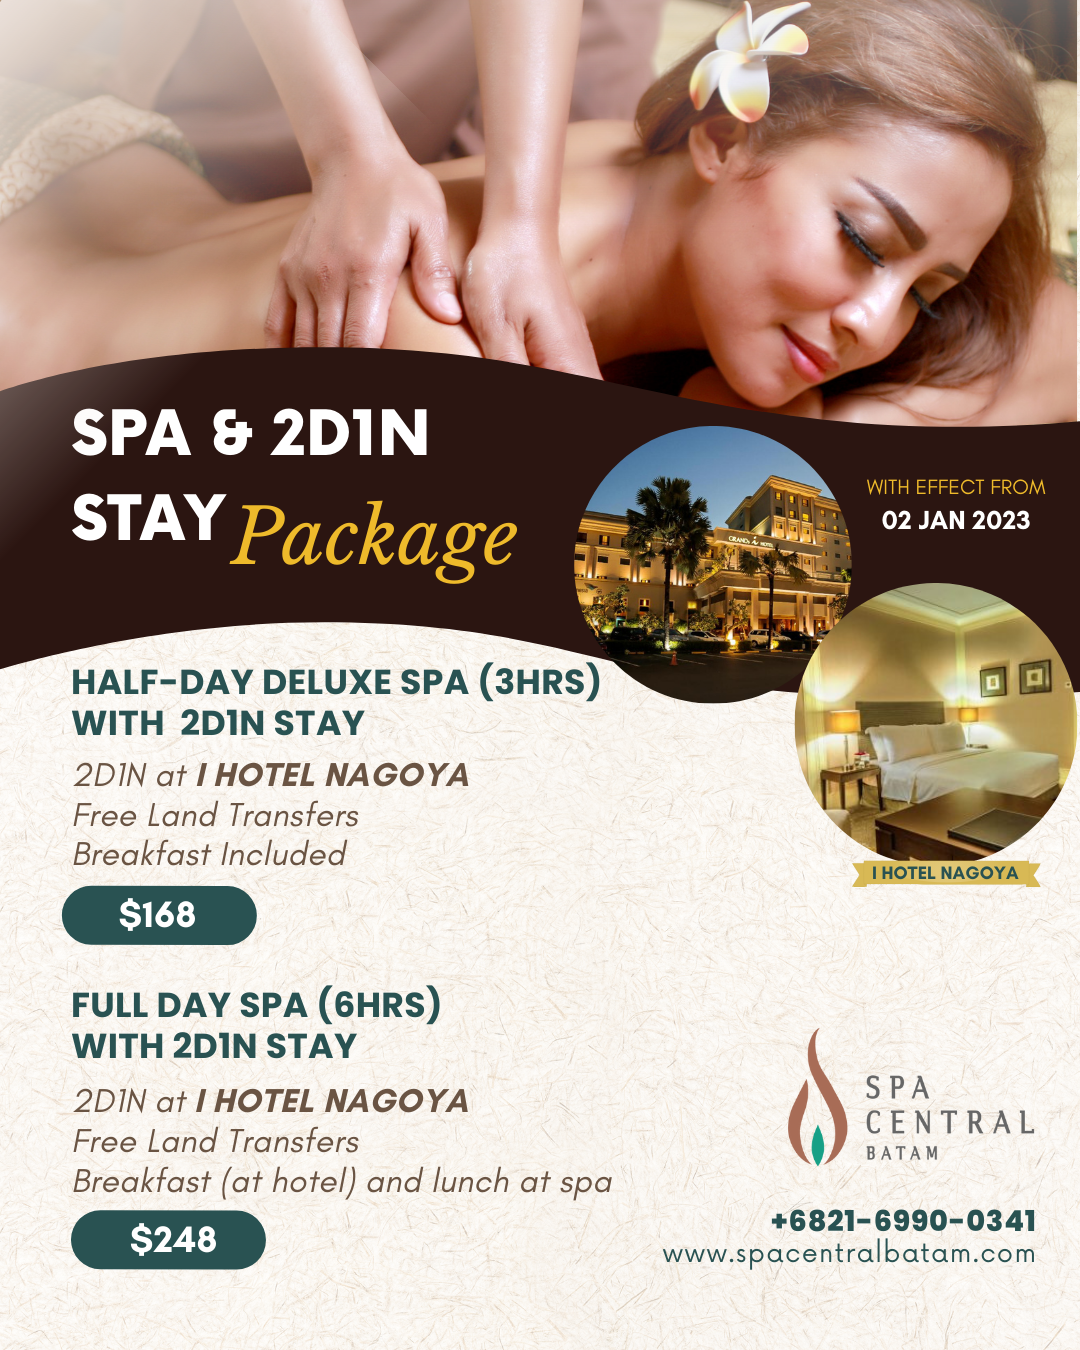 Spa and hotel package batam